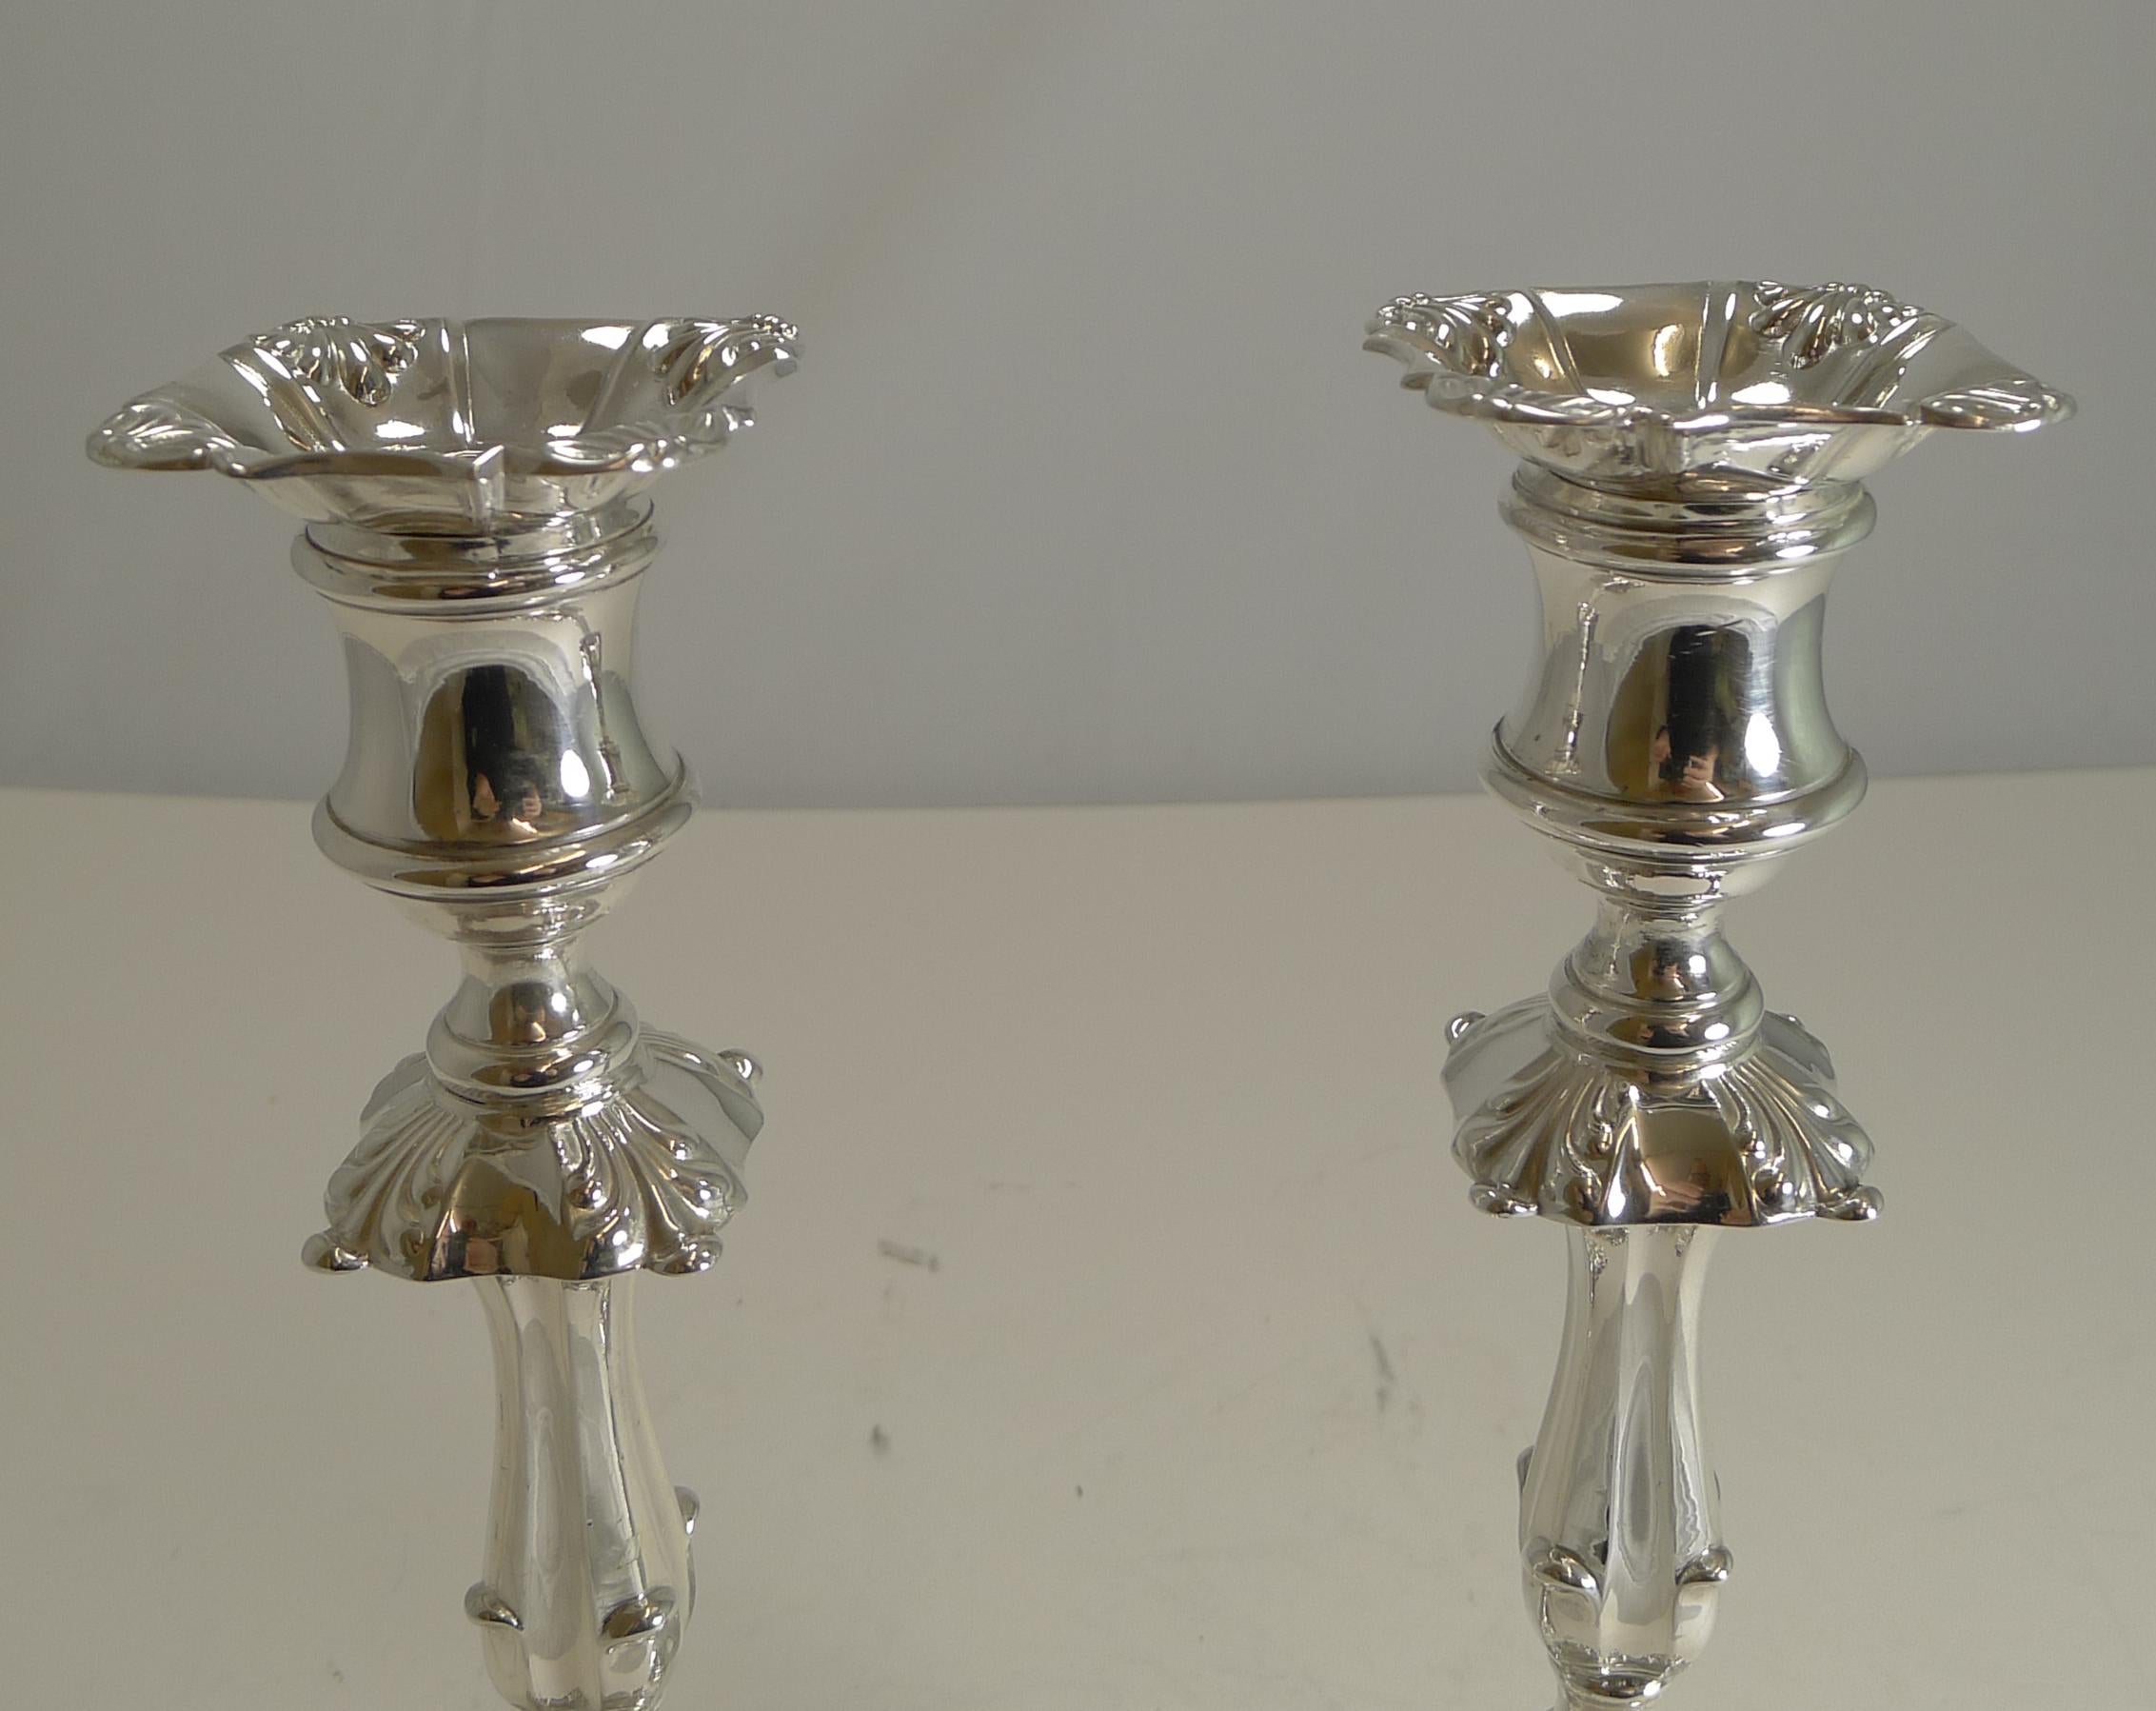 Mid-19th Century Pair of Antique English Candlesticks by Elkington, 1853